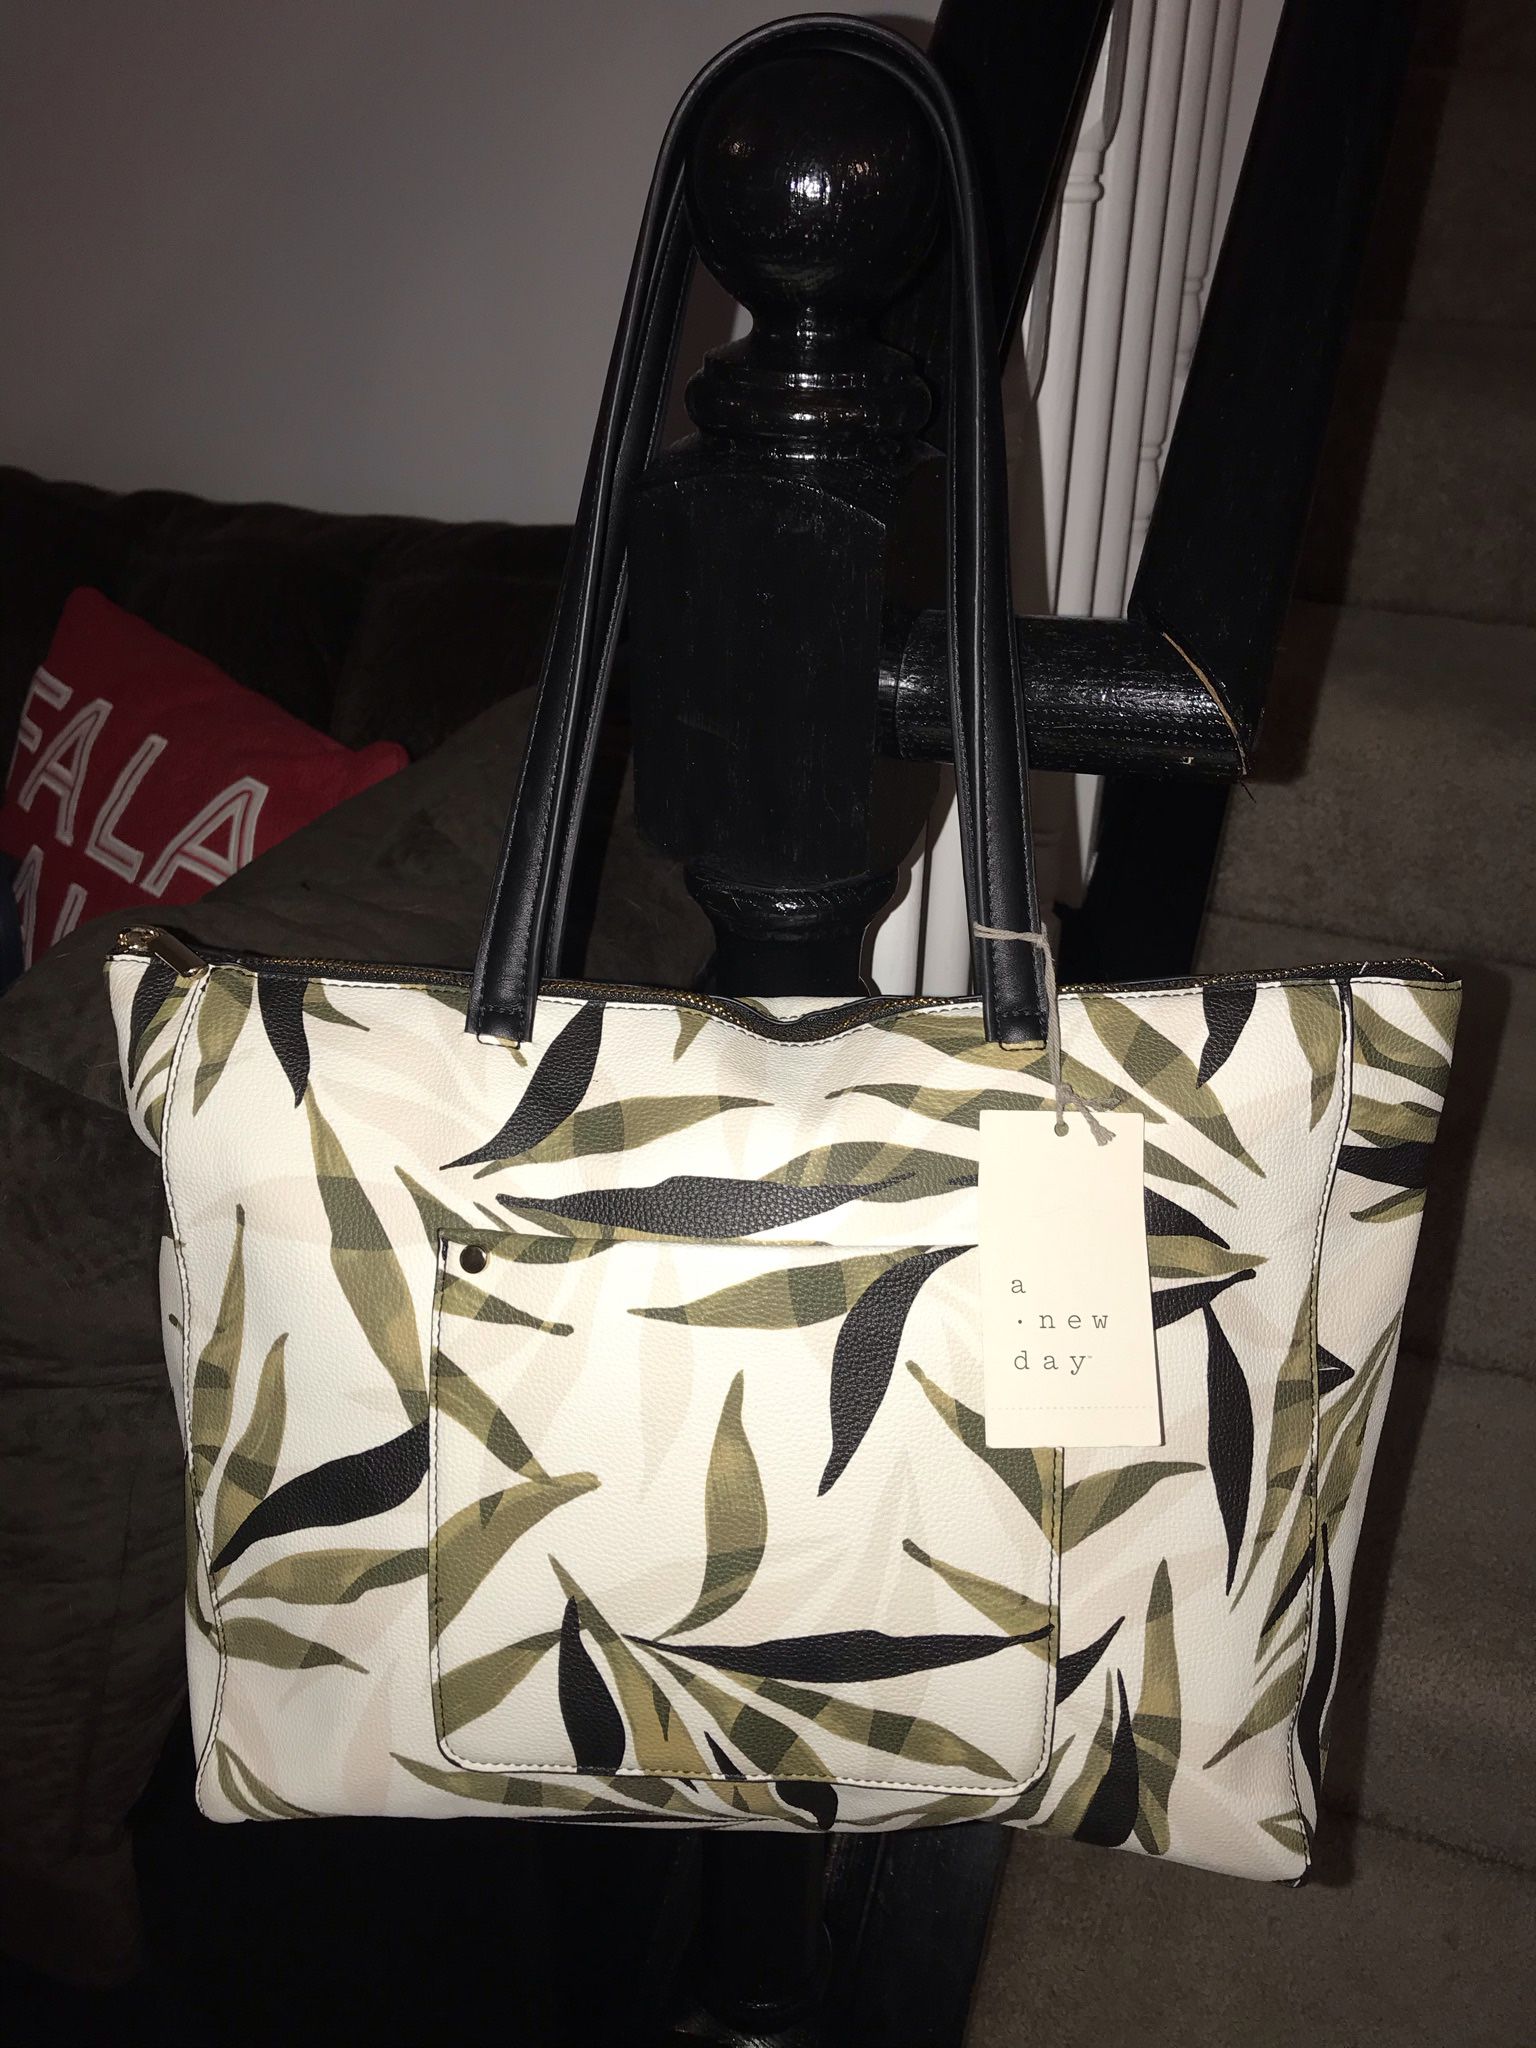 NWT A New day Tote